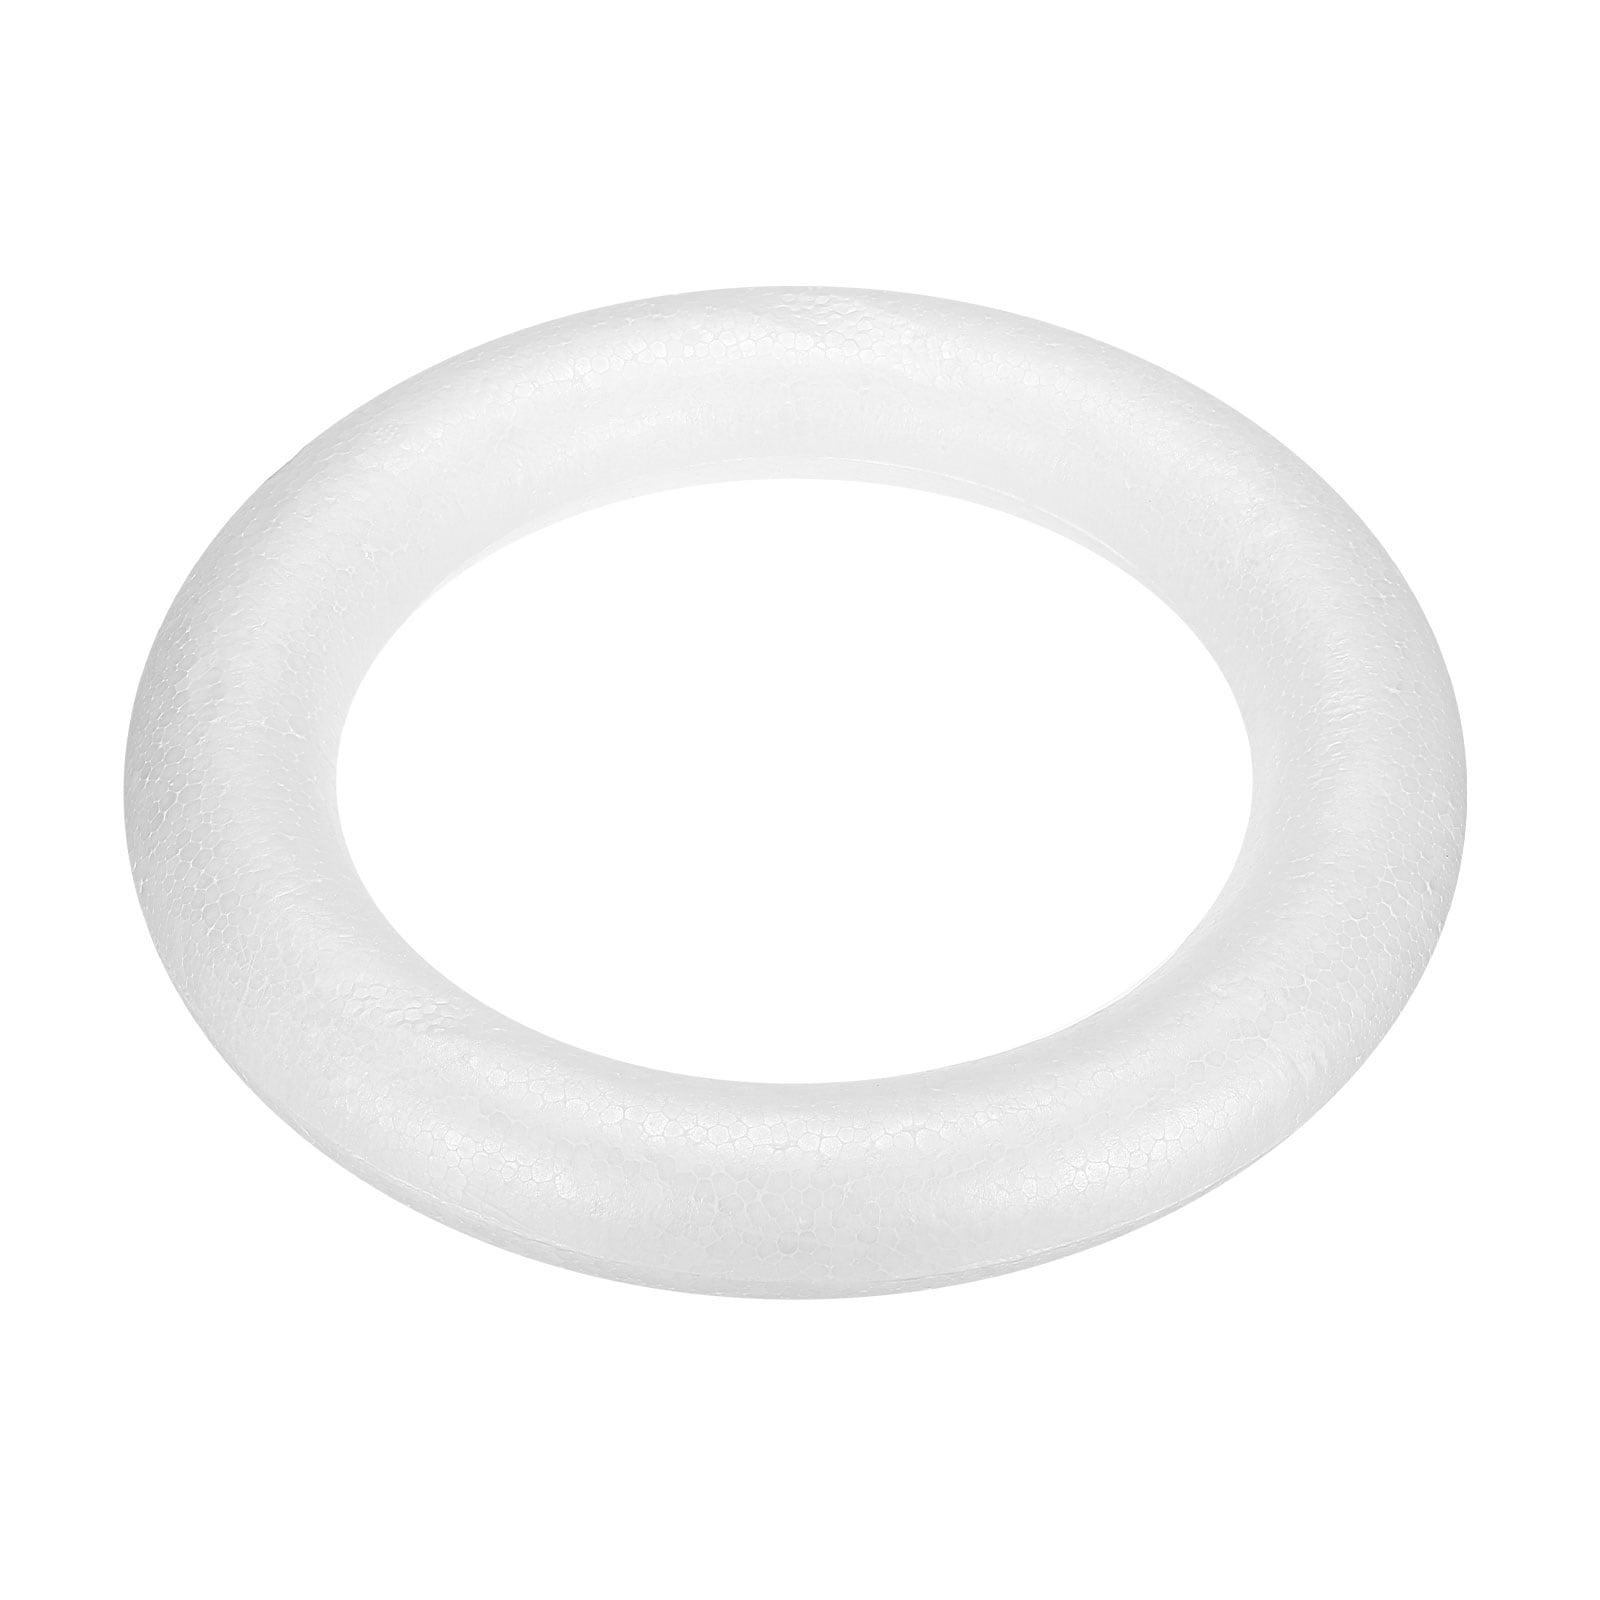 6.3 inch Foam Wreath Forms Round Craft Rings for DIY Art Crafts Pack of 1 - White